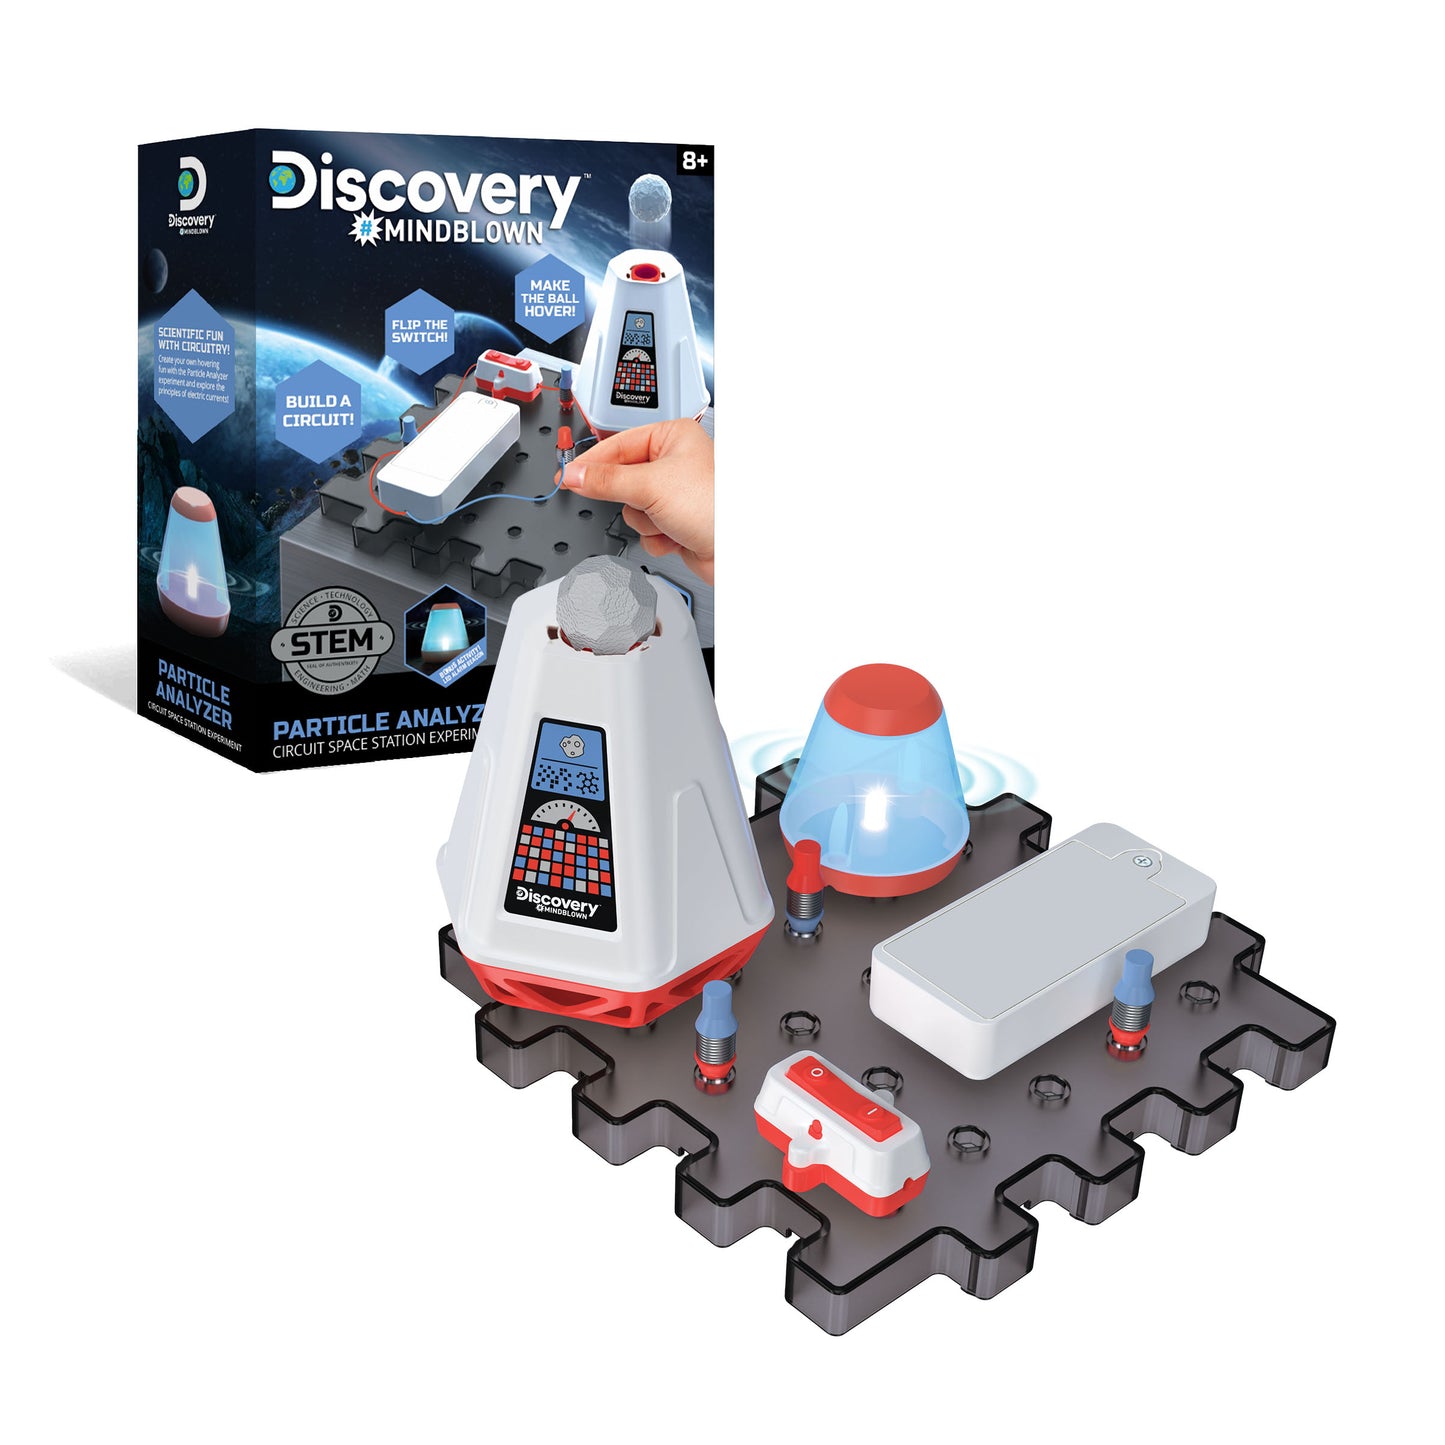 Discovery Mindblown Particle Analyzer Circuitry Set, Build-it-Yourself Engineering Toy Kit